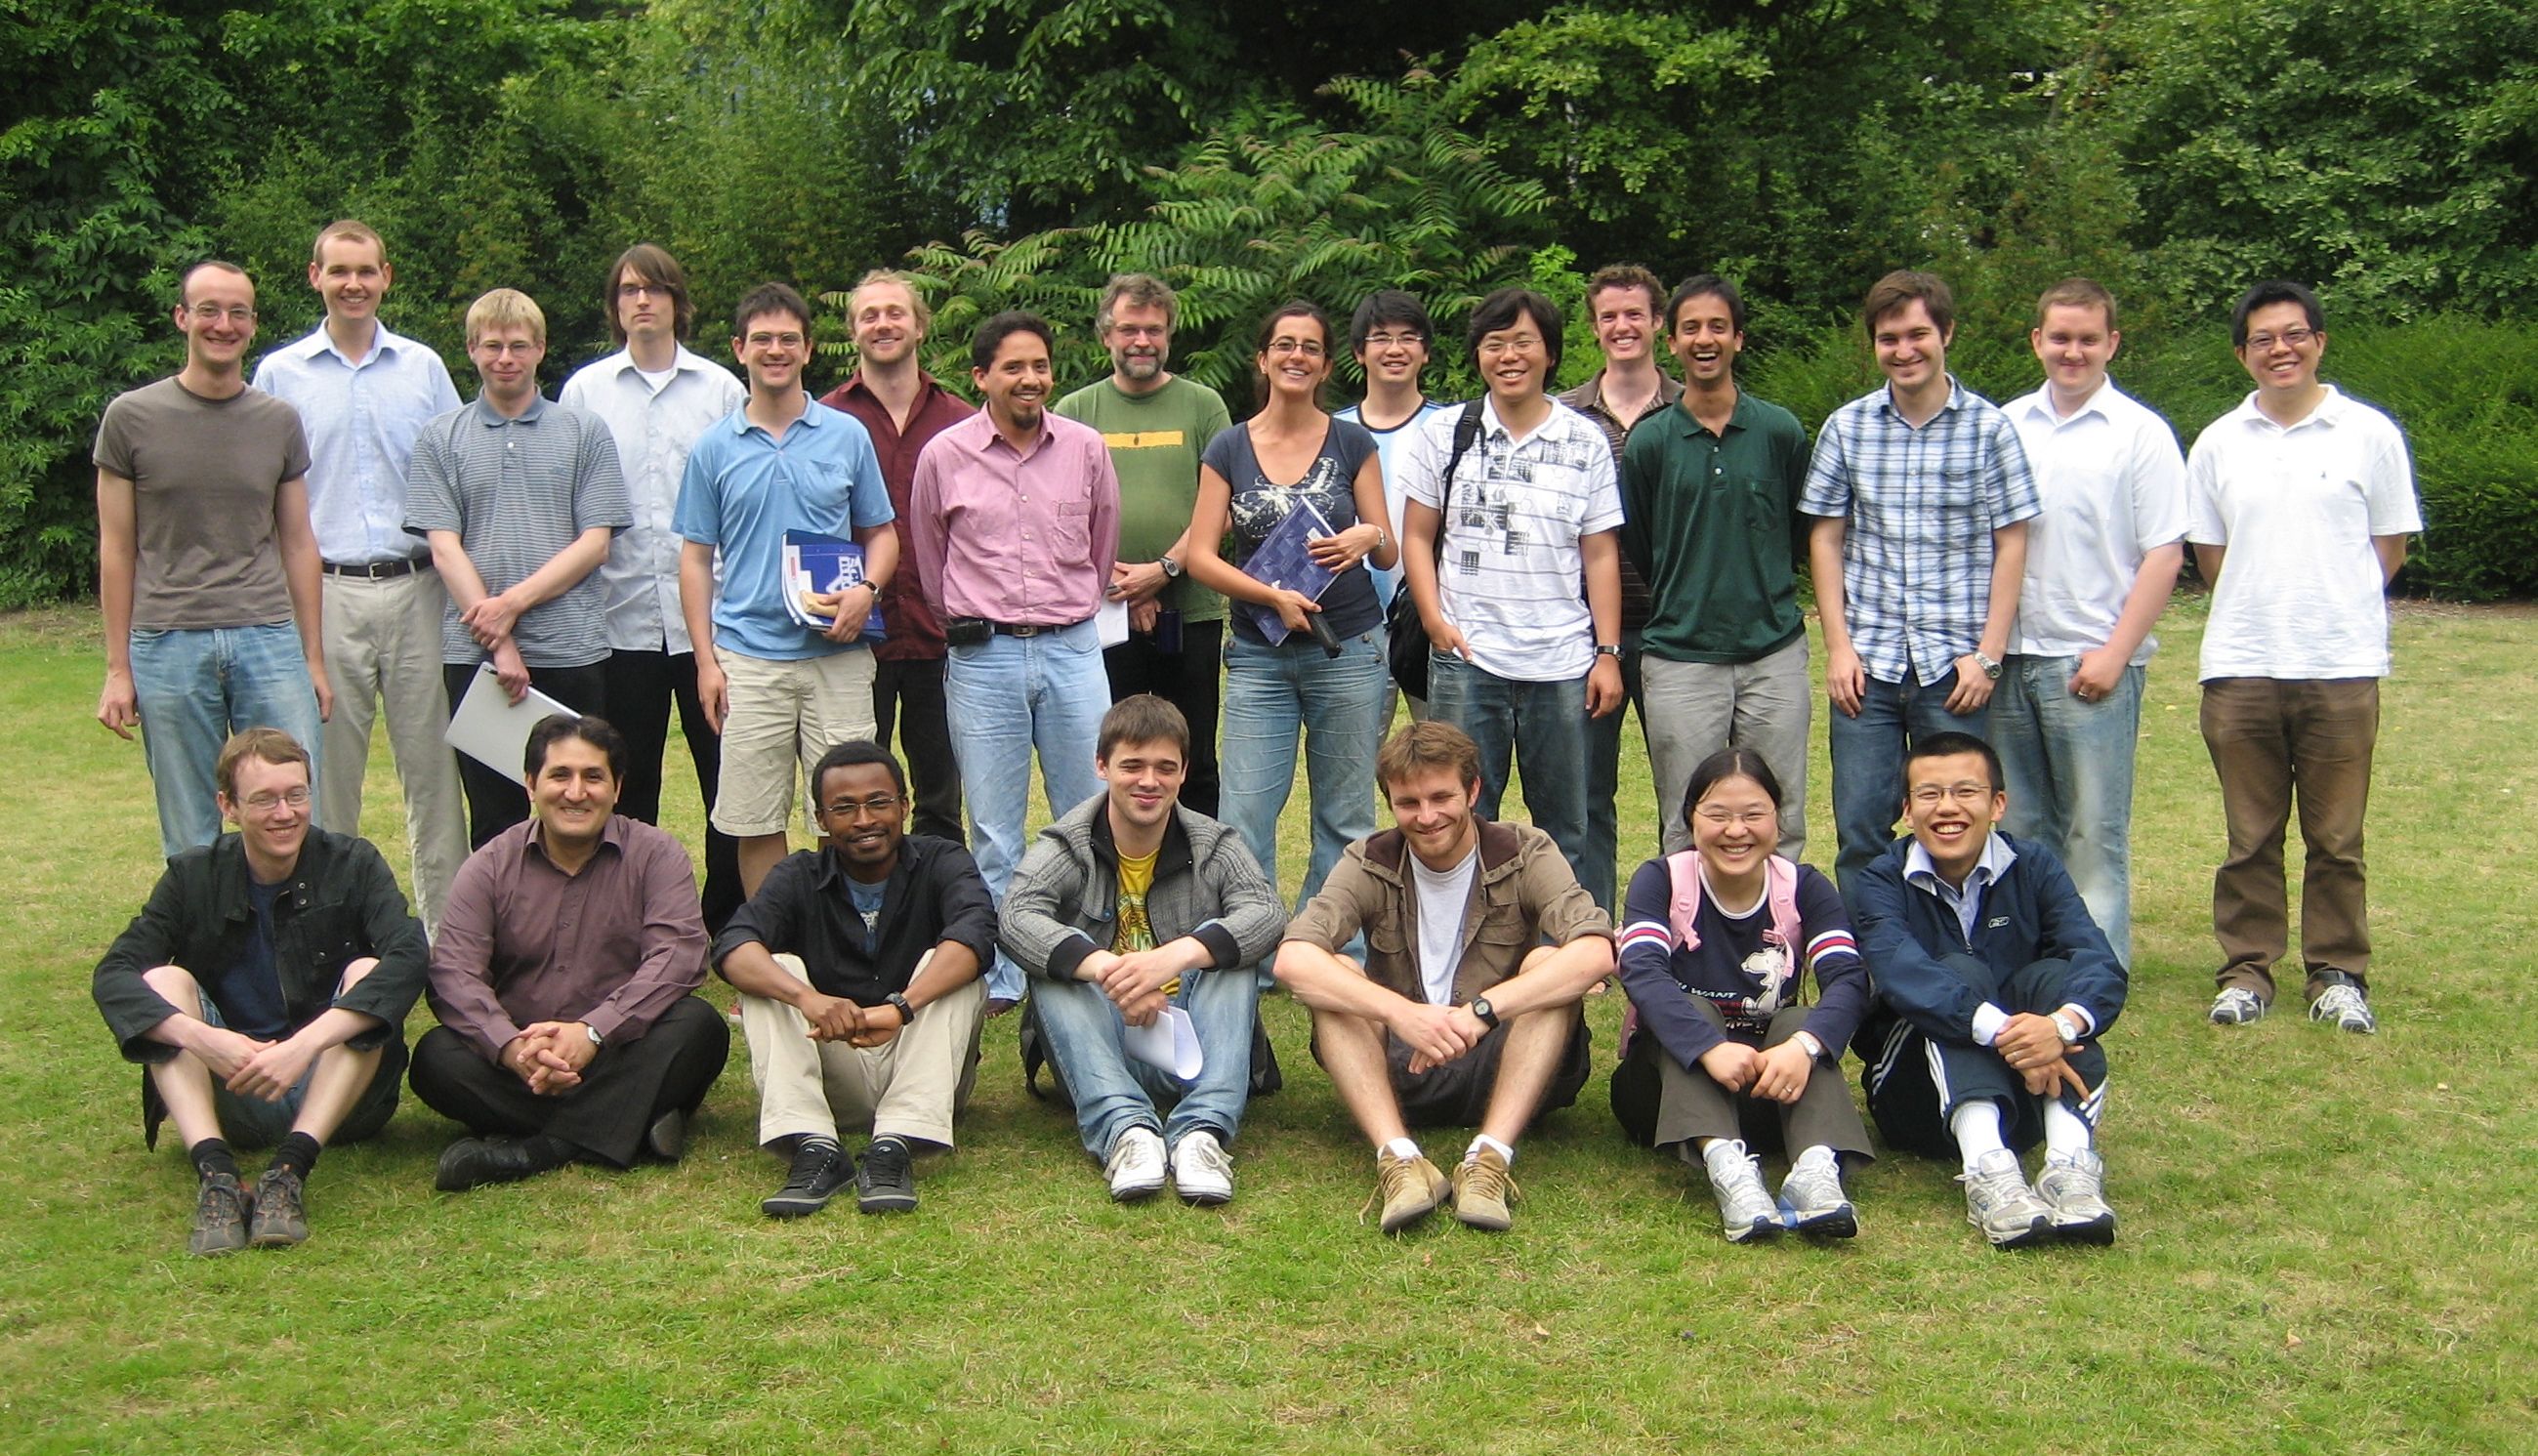 The participants (picture taken in June)